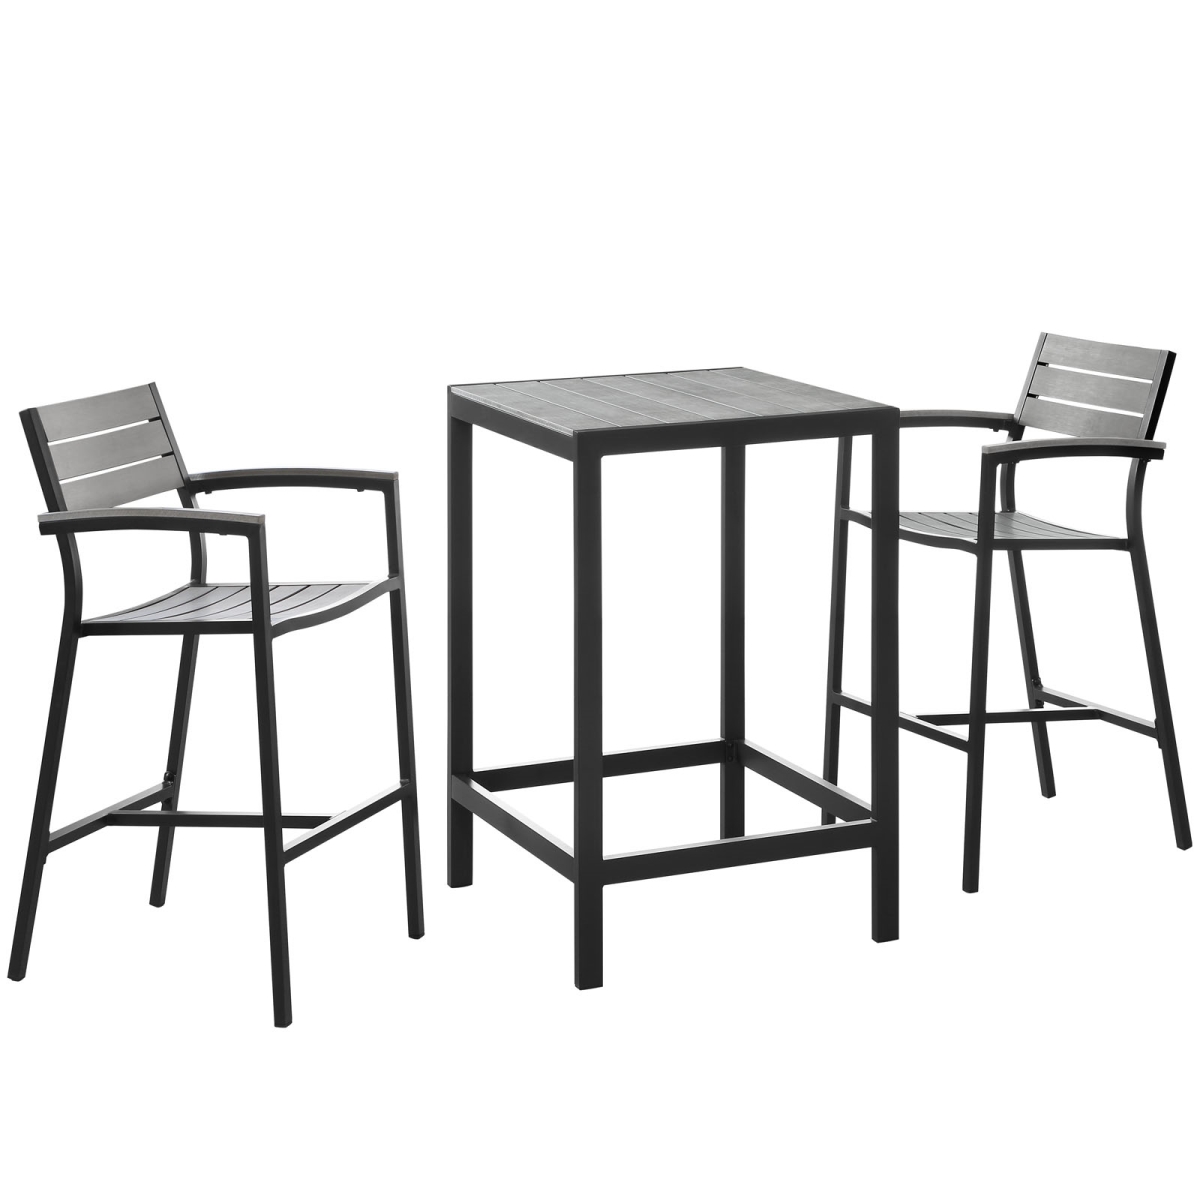 Eastend Eei-1754-brn-gry-set 3 Piece Maine Outdoor Patio Dining Set, Brown & Gray